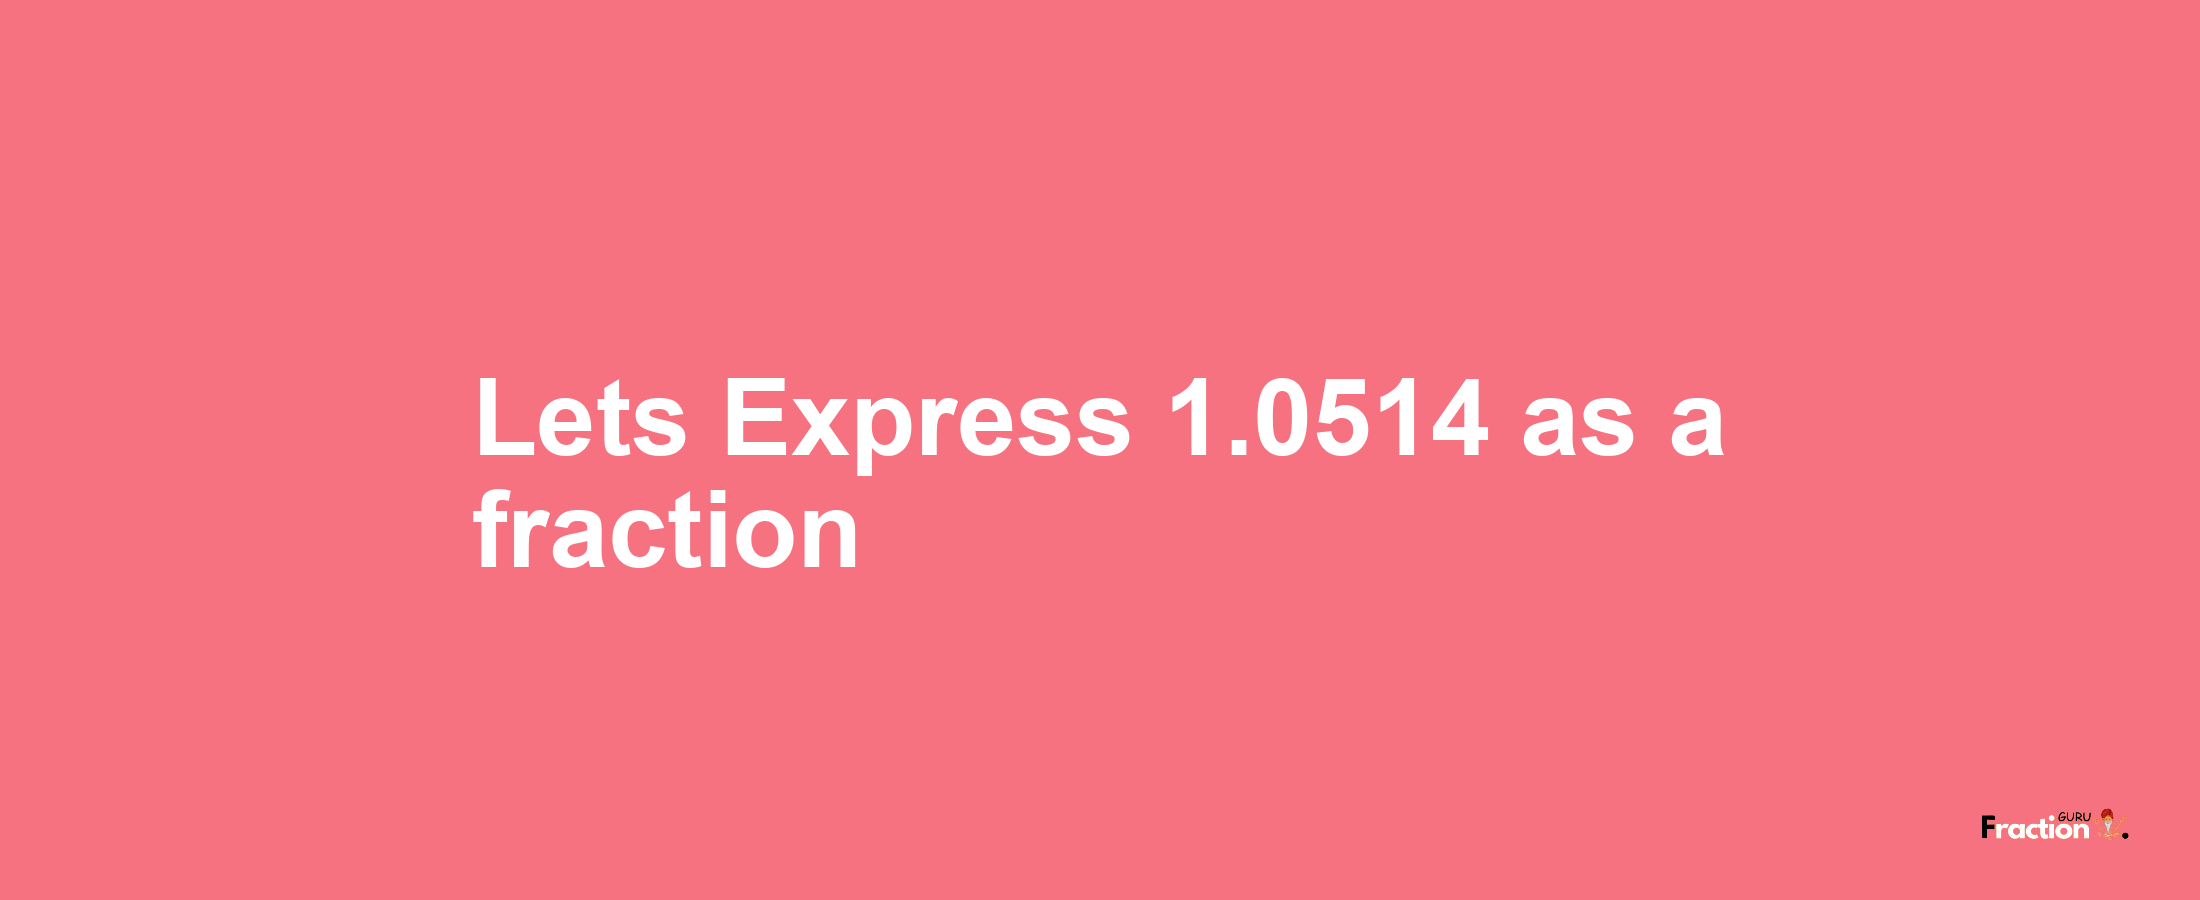 Lets Express 1.0514 as afraction